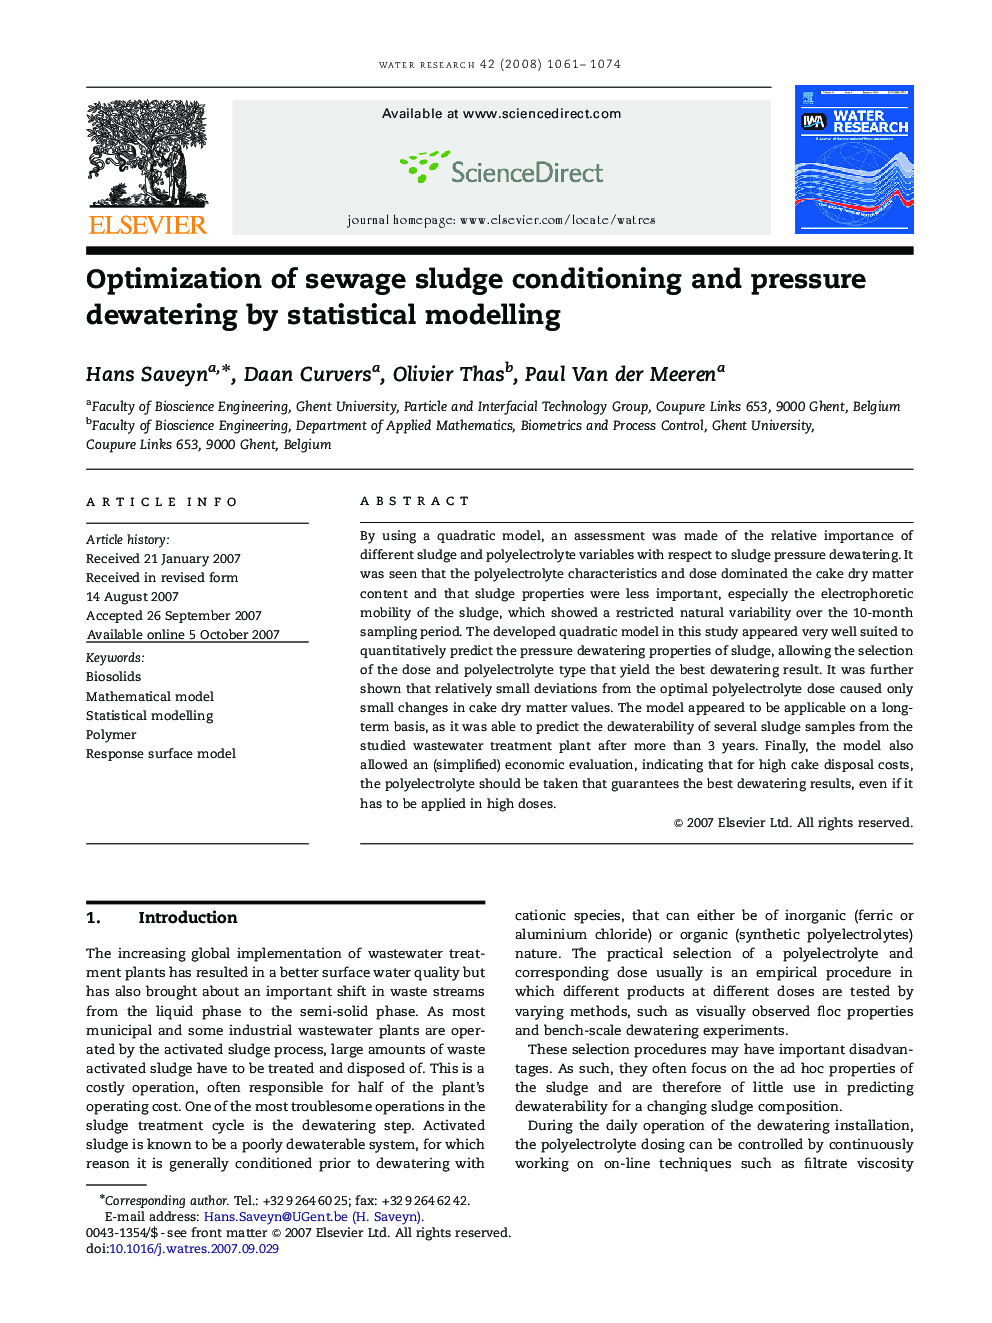 Optimization of sewage sludge conditioning and pressure dewatering by statistical modelling